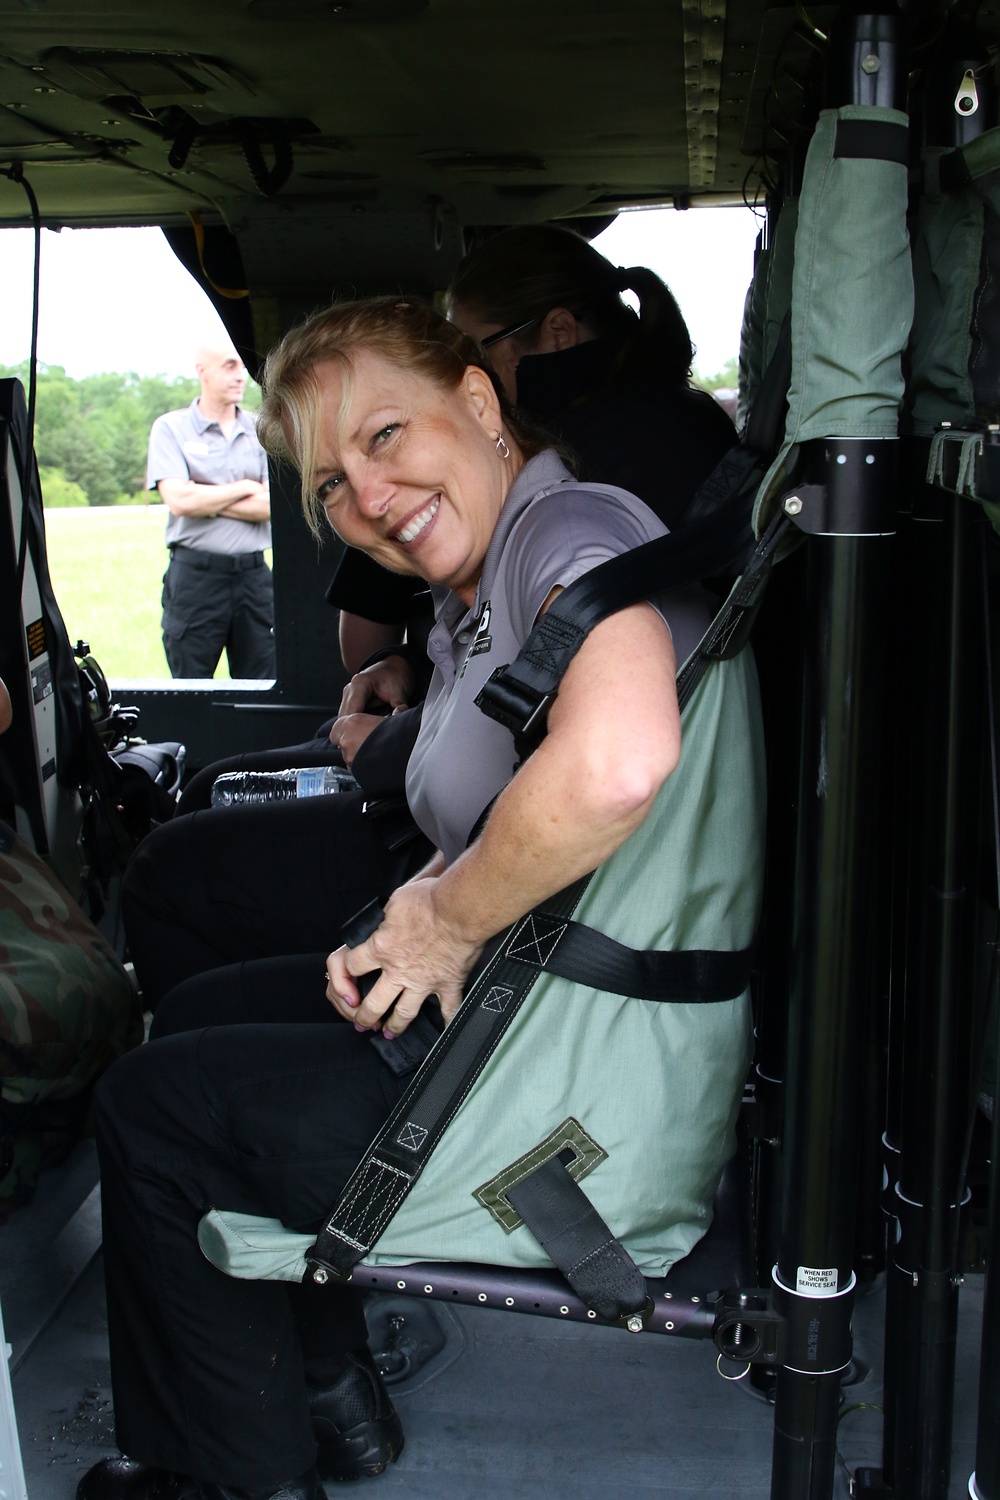 DOD ELDP comes to Camp Swift